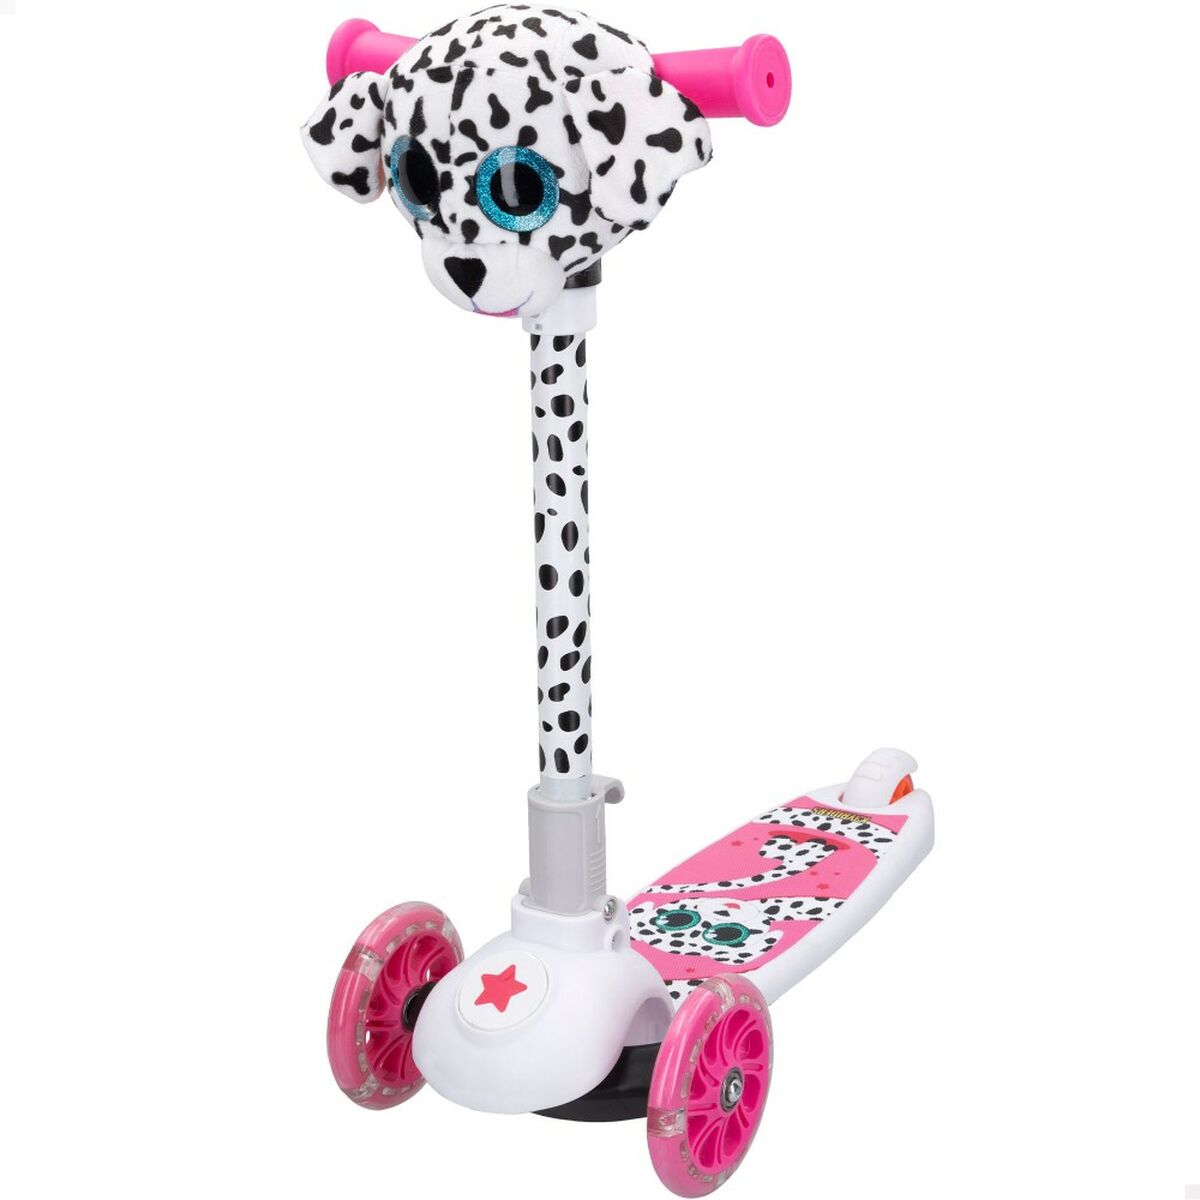 Scooter K3yriders Dotty 4 Unités